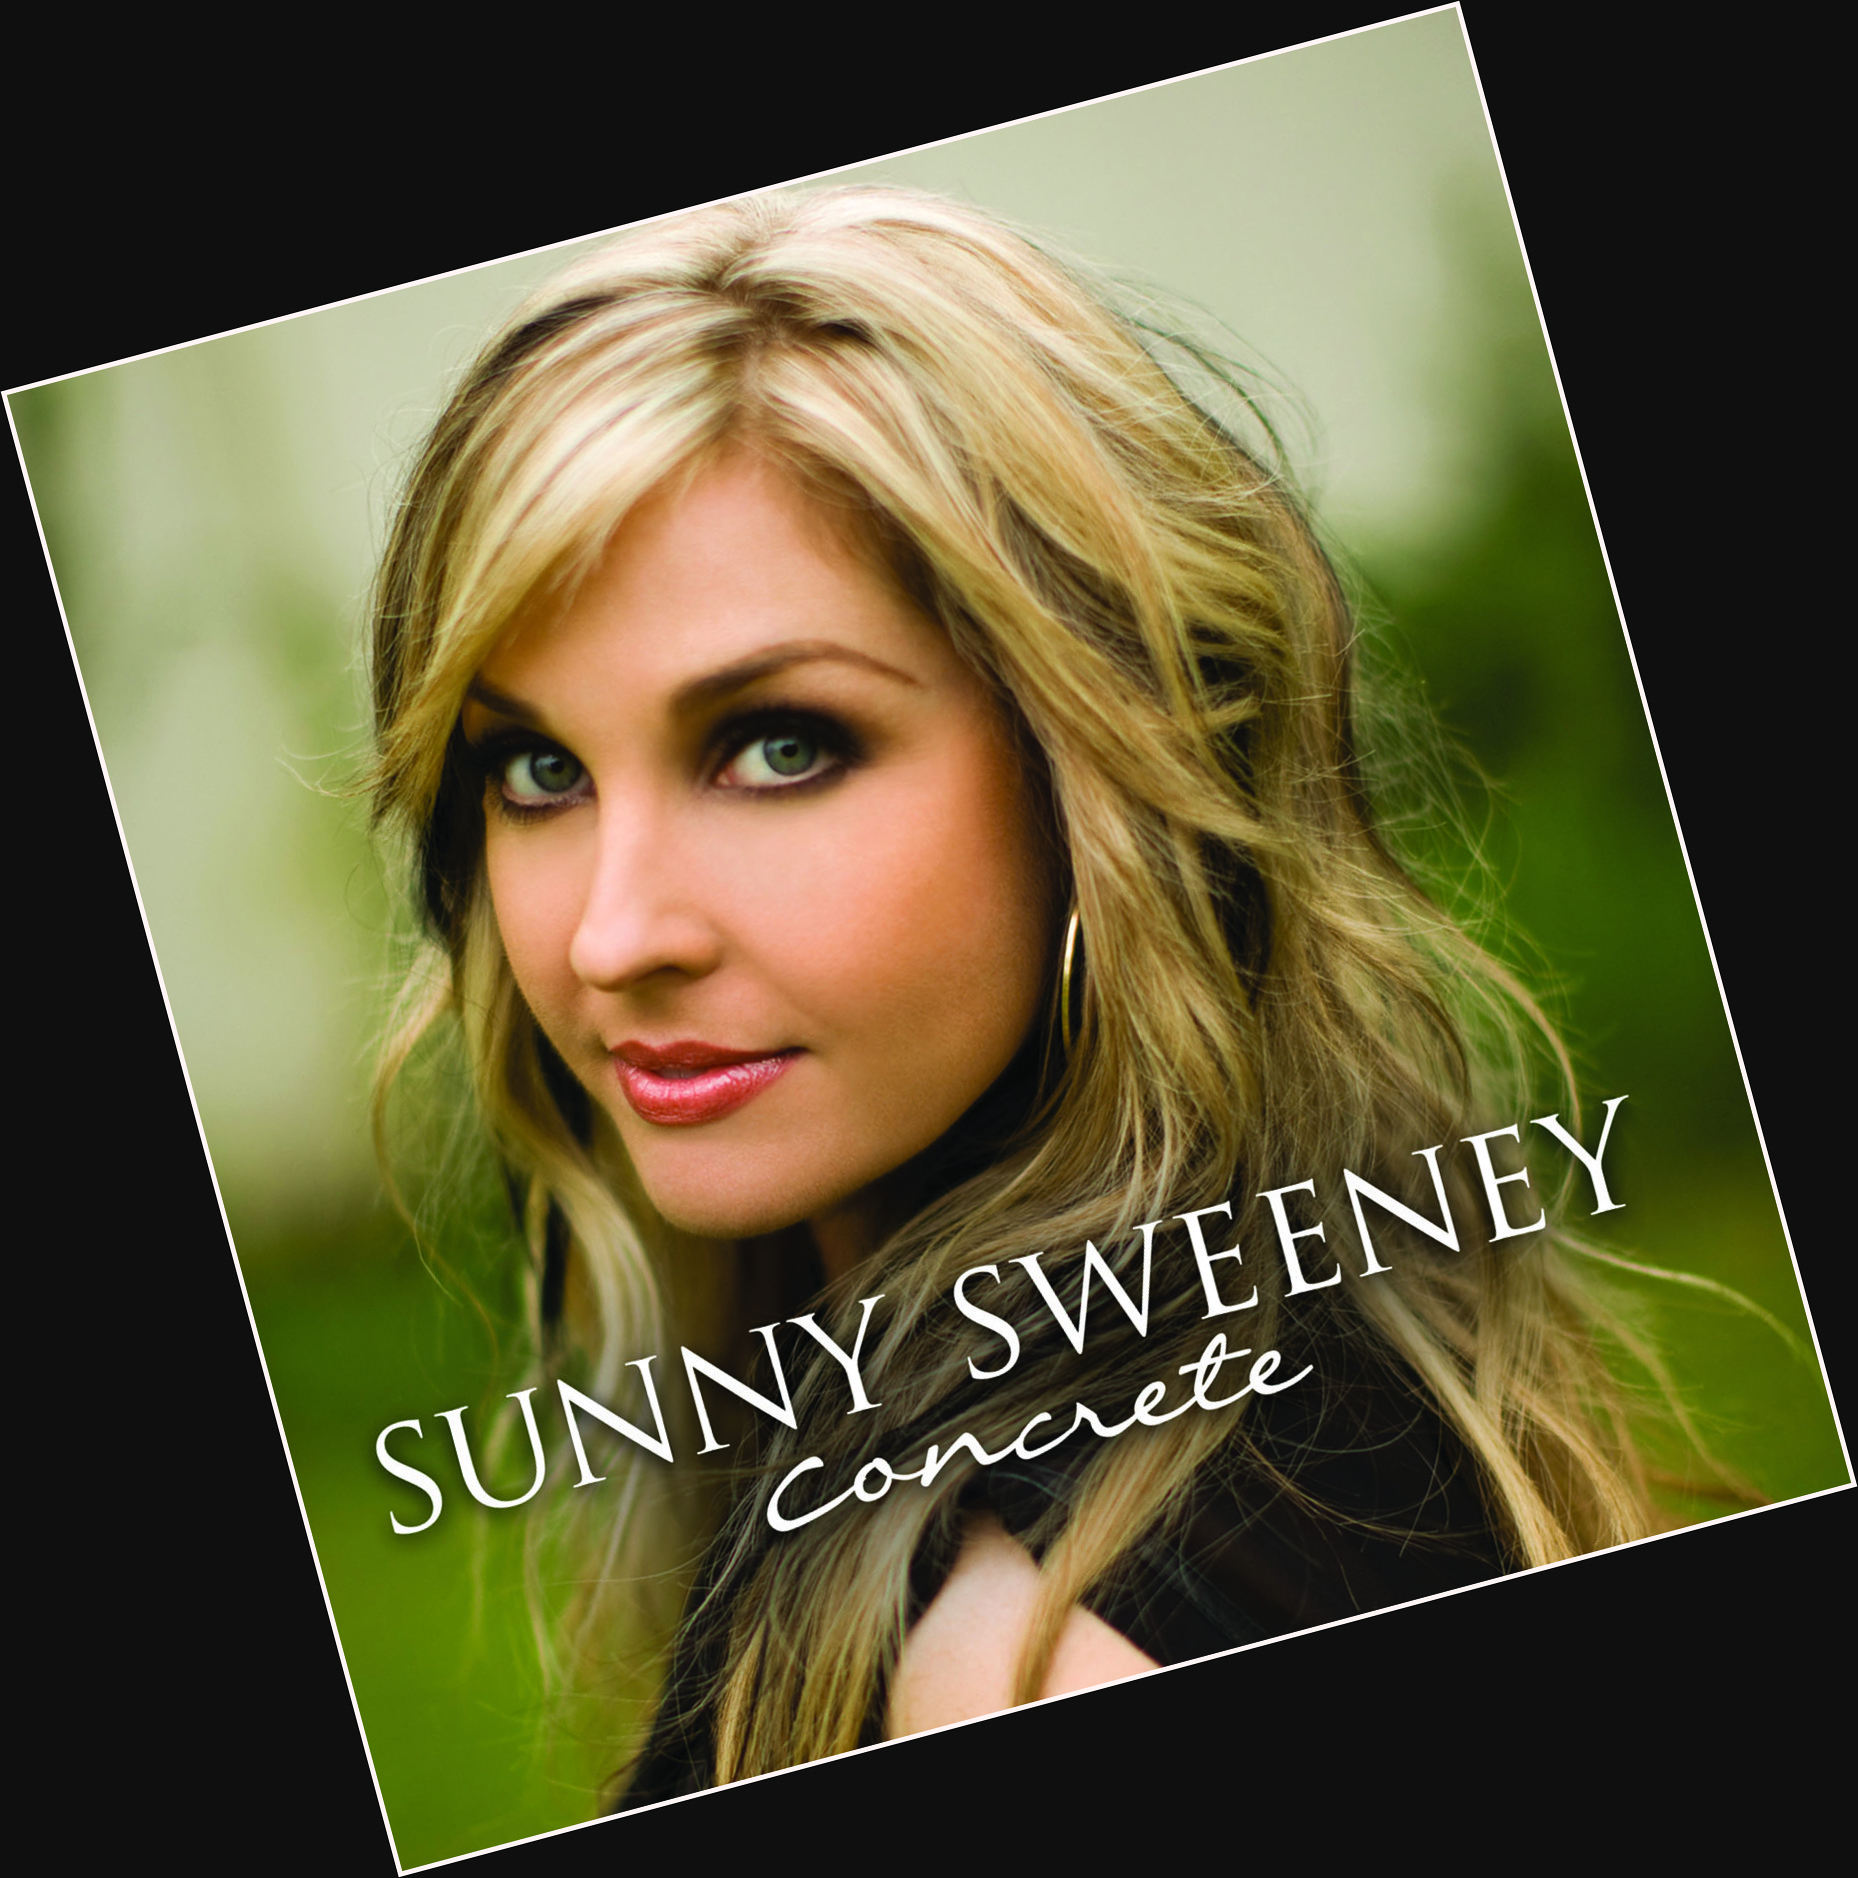 Sunny Sweeney exclusive hot pic 8